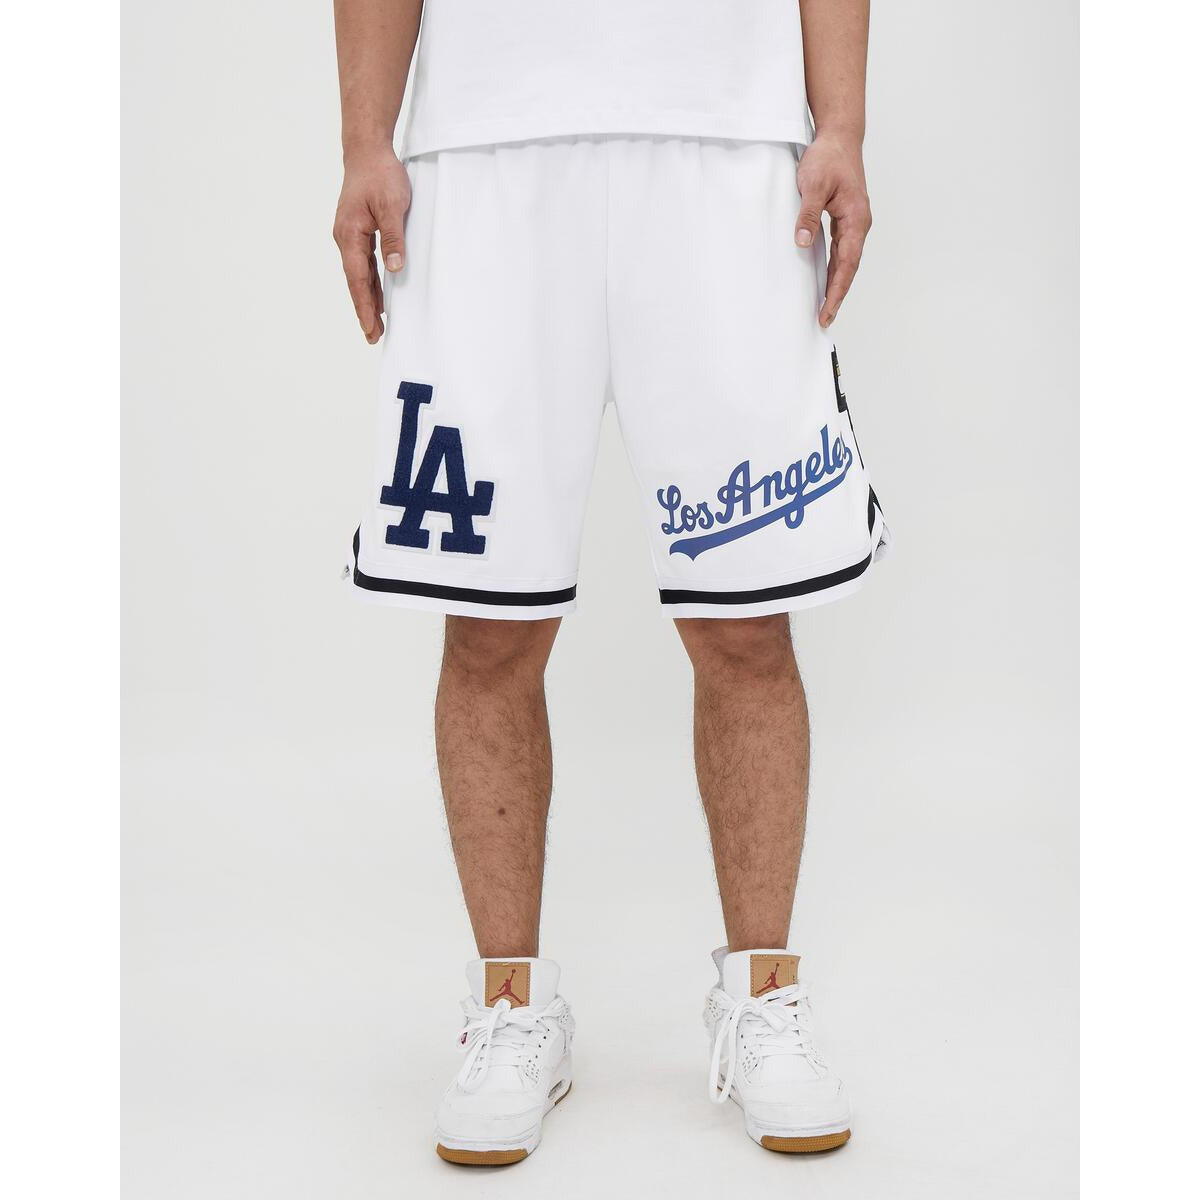 Men's Pro Standard Gray Los Angeles Dodgers 2020 World Series Champions Team Shorts Size: Extra Large